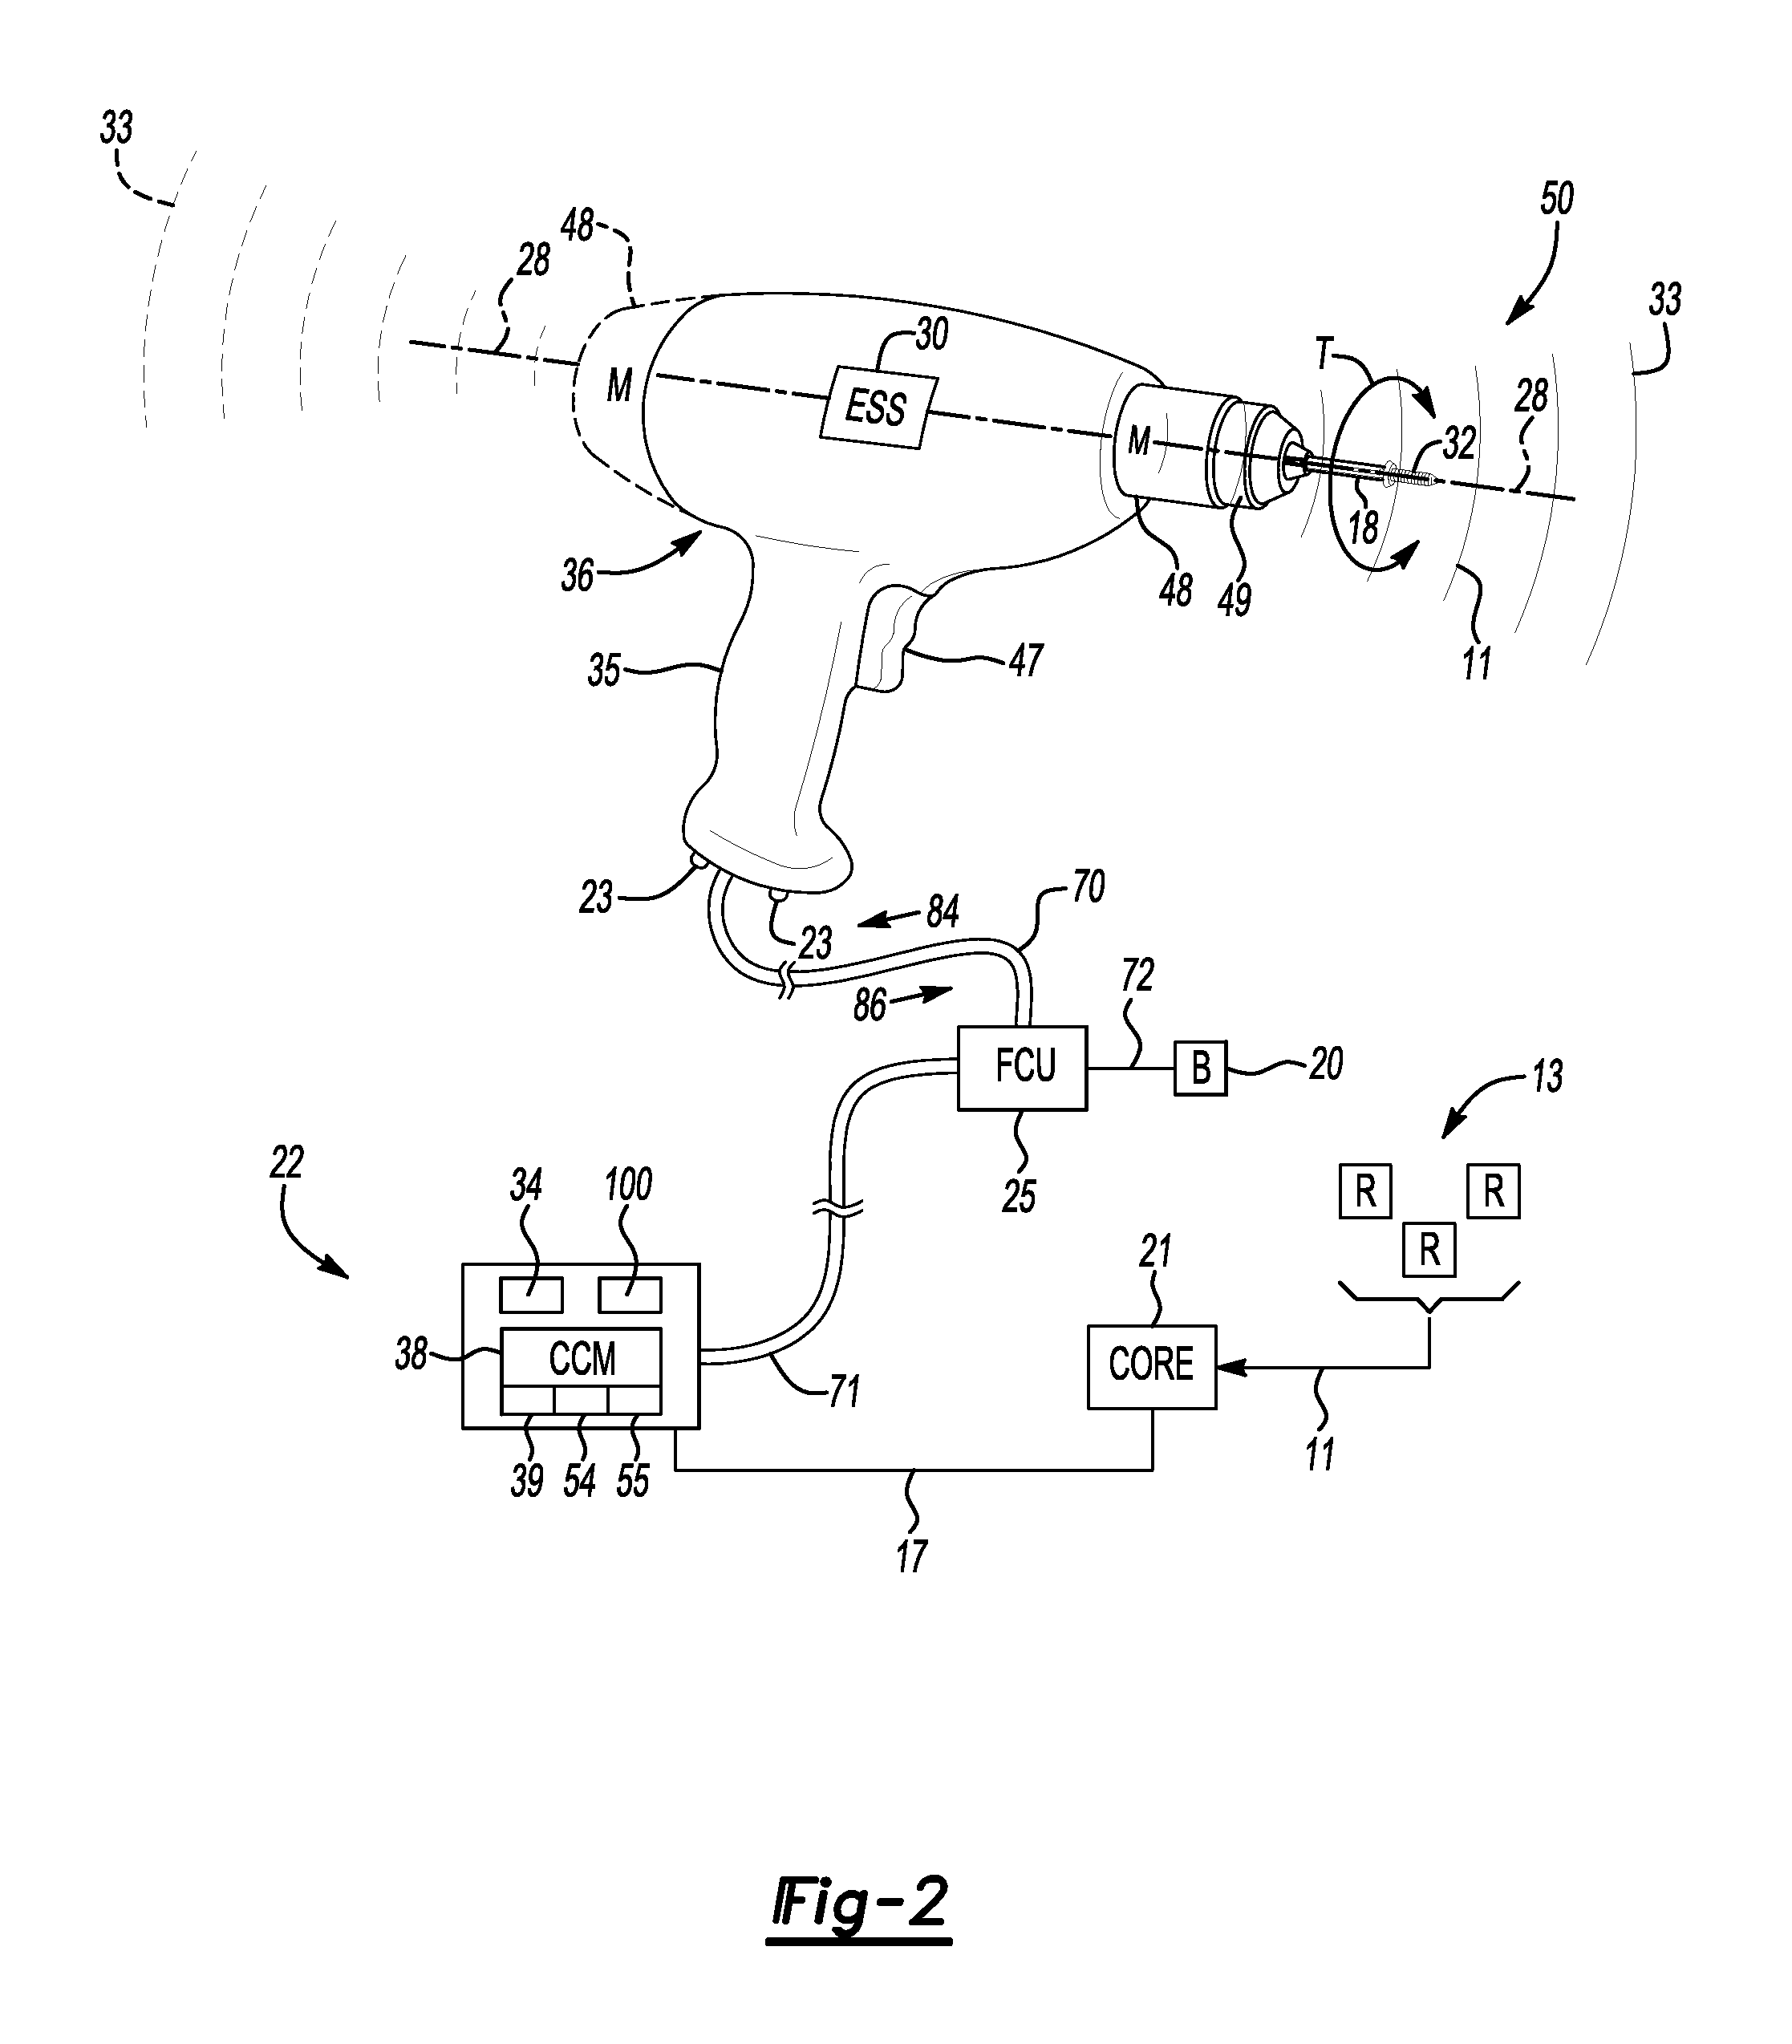 System and method for optimizing a production process using electromagnetic-based local positioning capabilities